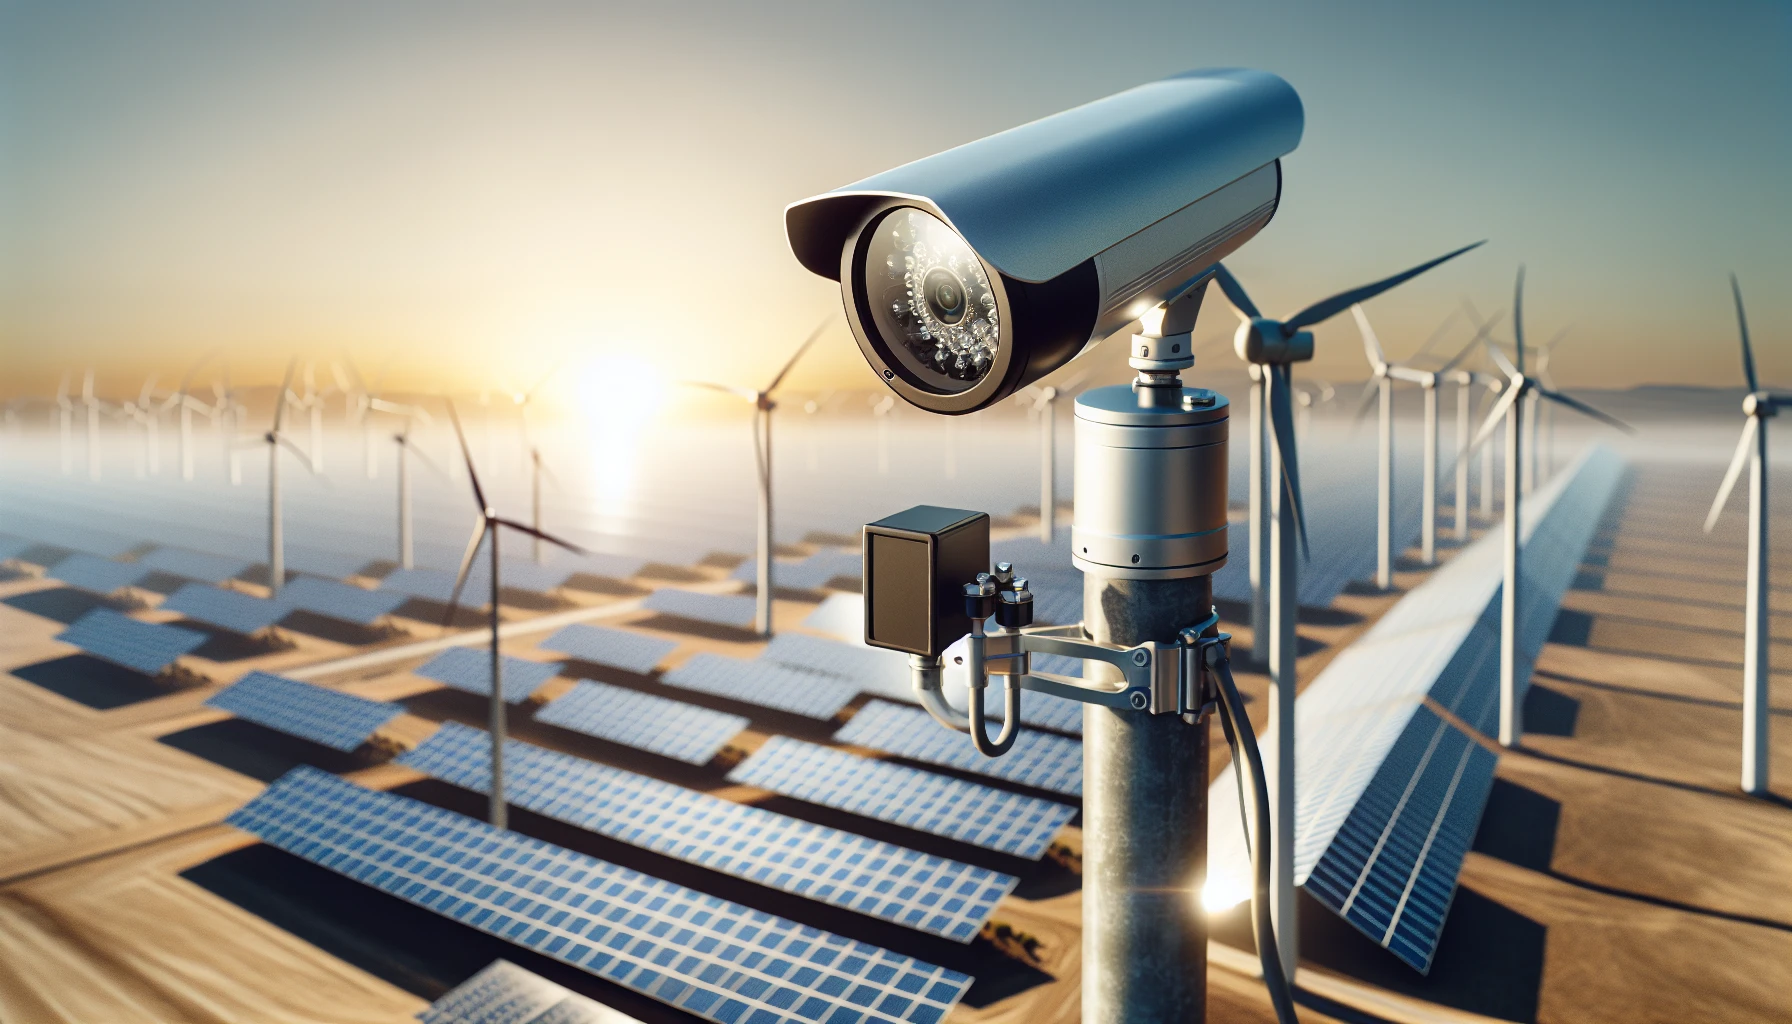 Solar-powered security camera overlooking a remote energy site